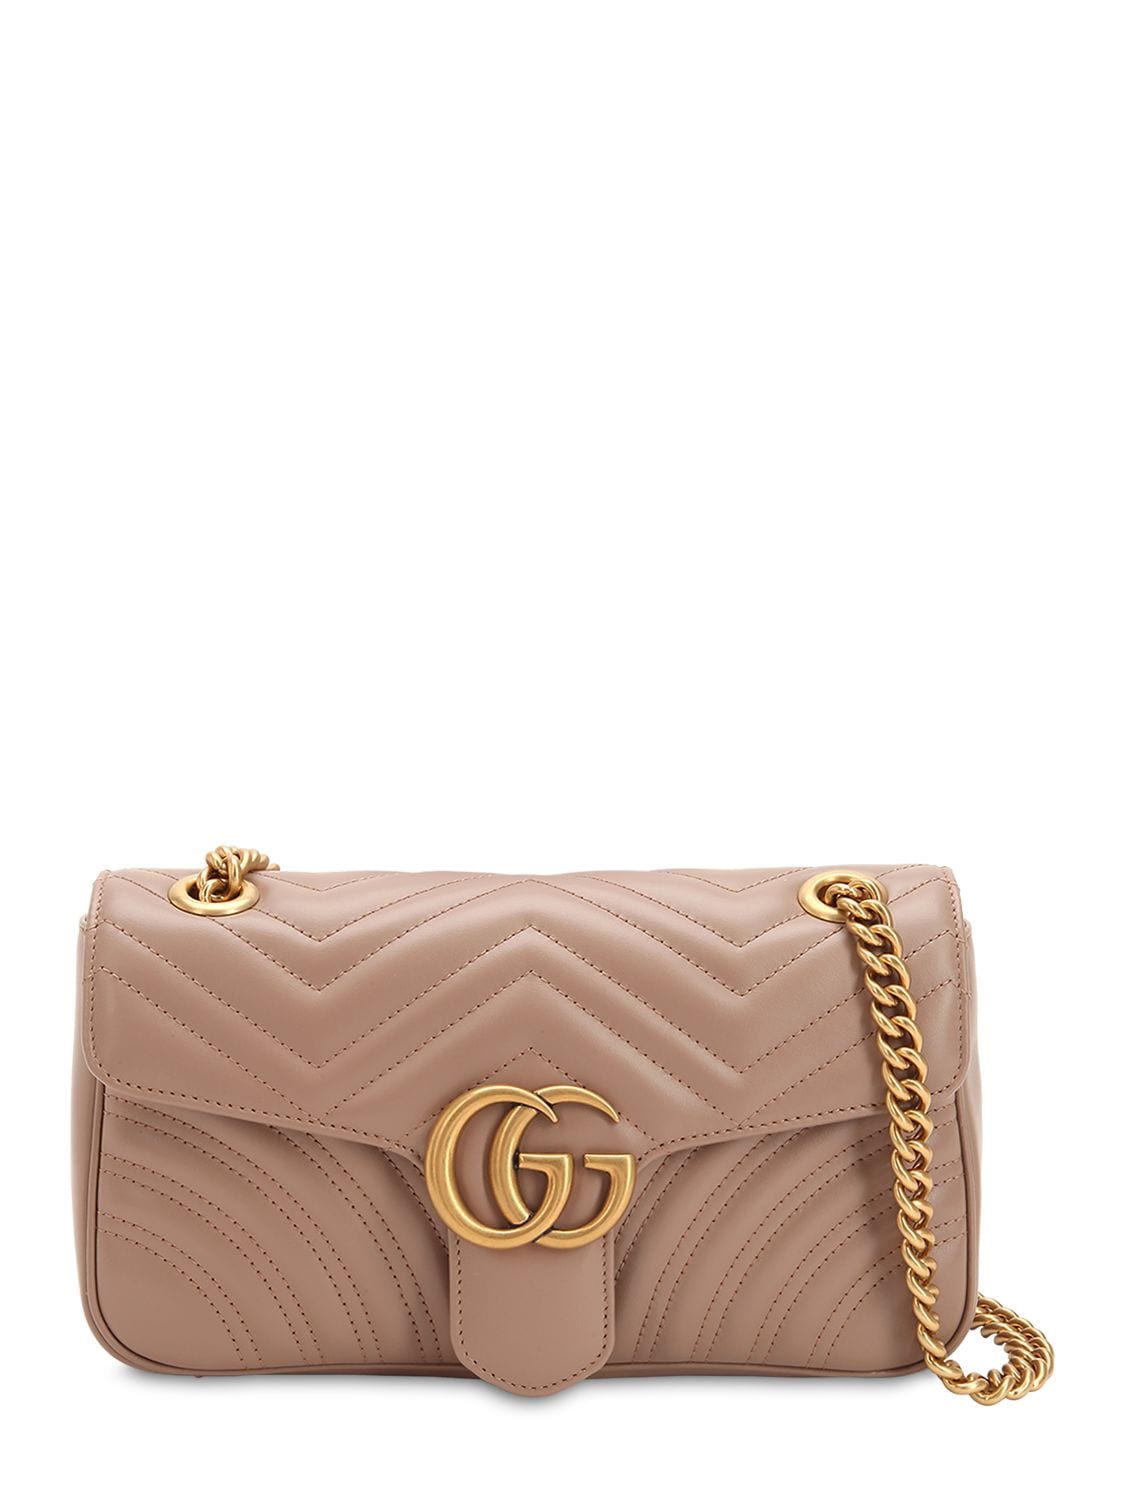 Gucci Small Gg Marmont 2.0 Leather Bag Nude | ModeSens